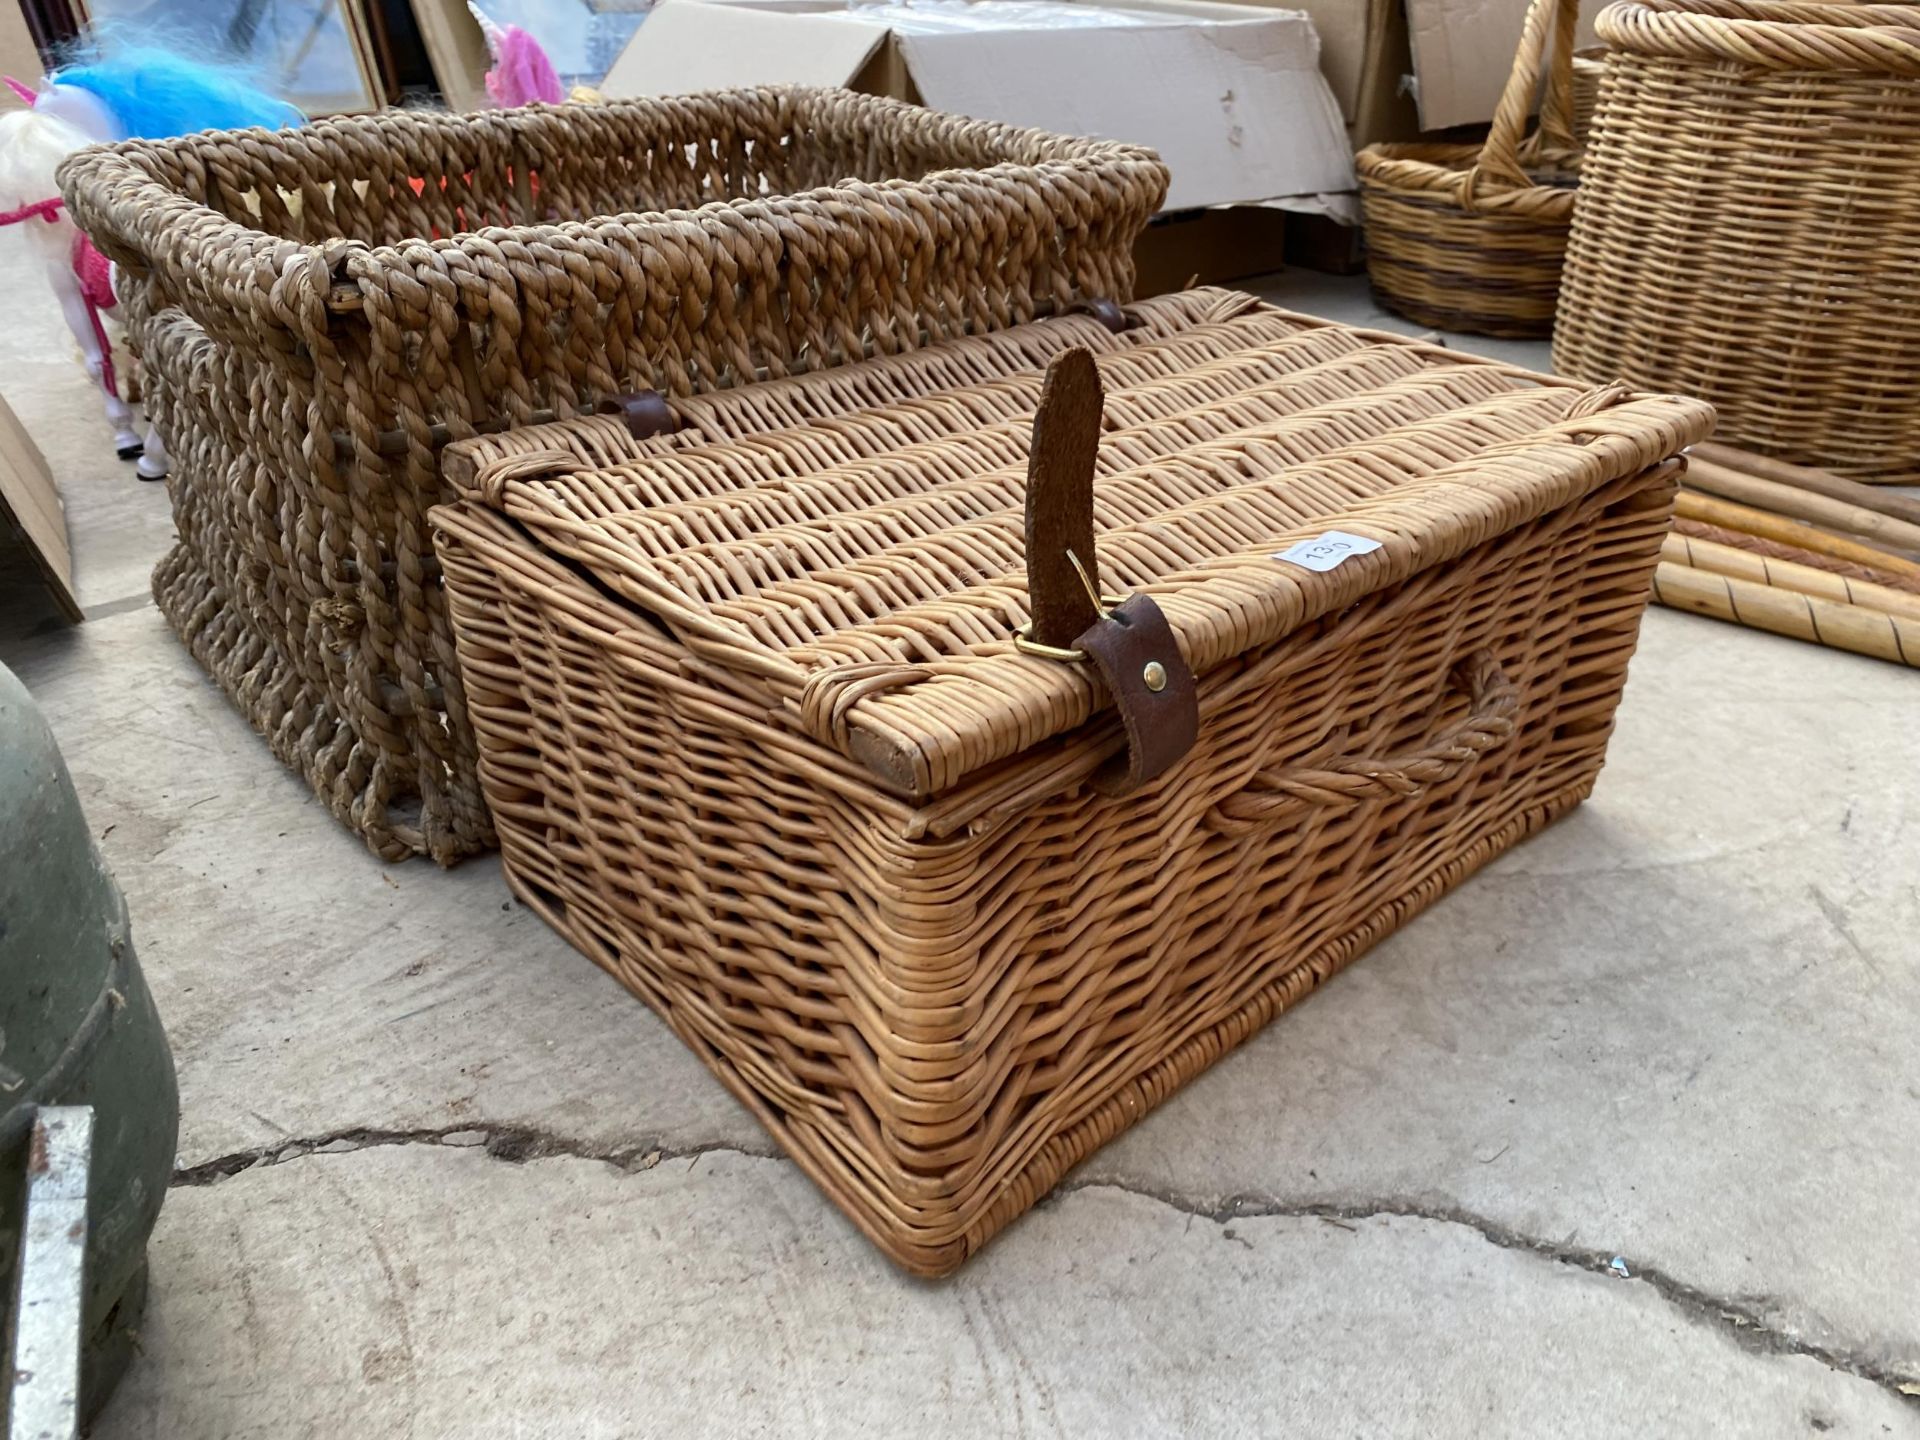 A WICKER PICNIC BASKET AND A FURTHER WICKER EFFECT LOG BASKET - Image 2 of 5